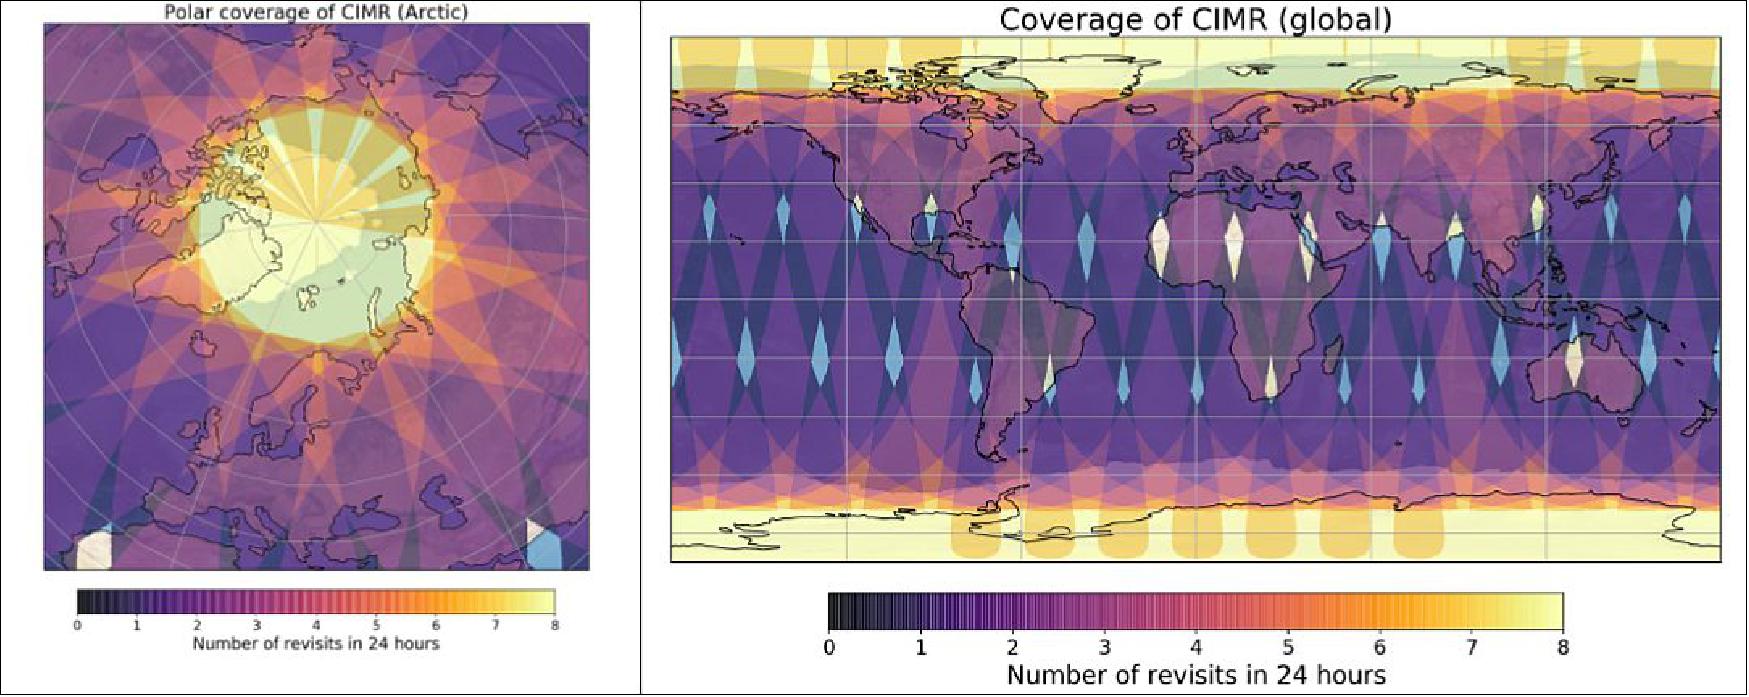 Figure 1: Example plots showing a simulation of the expected CIMR global coverage and over the Arctic highlighting the number of revisits each day with no hole at the pole. Daily coverage of the Copernicus Imaging Microwave Radiometer mission in the Arctic regions. The color map shows the number of revisit overpasses in a 24 hours period. The CIMR mission is specifically designed to ensure sub-daily coverage in all the Arctic region. Particularly, CIMR will achieve full sub-daily coverage of the Arctic region (i.e. "no hole at the pole" requirement). By symmetry, the coverage is also excellent in the Antarctic region. Over 95% of the globe will be covered on a daily basis (Lavergne, T., Pinol Sole, M. and Donlon, C.: Daily coverage of CIMR (Arctic, Antarctic, and Global views), figshare, doi:10.6084/m9.figshare.7749284.v1, 2019), image credit: ESA